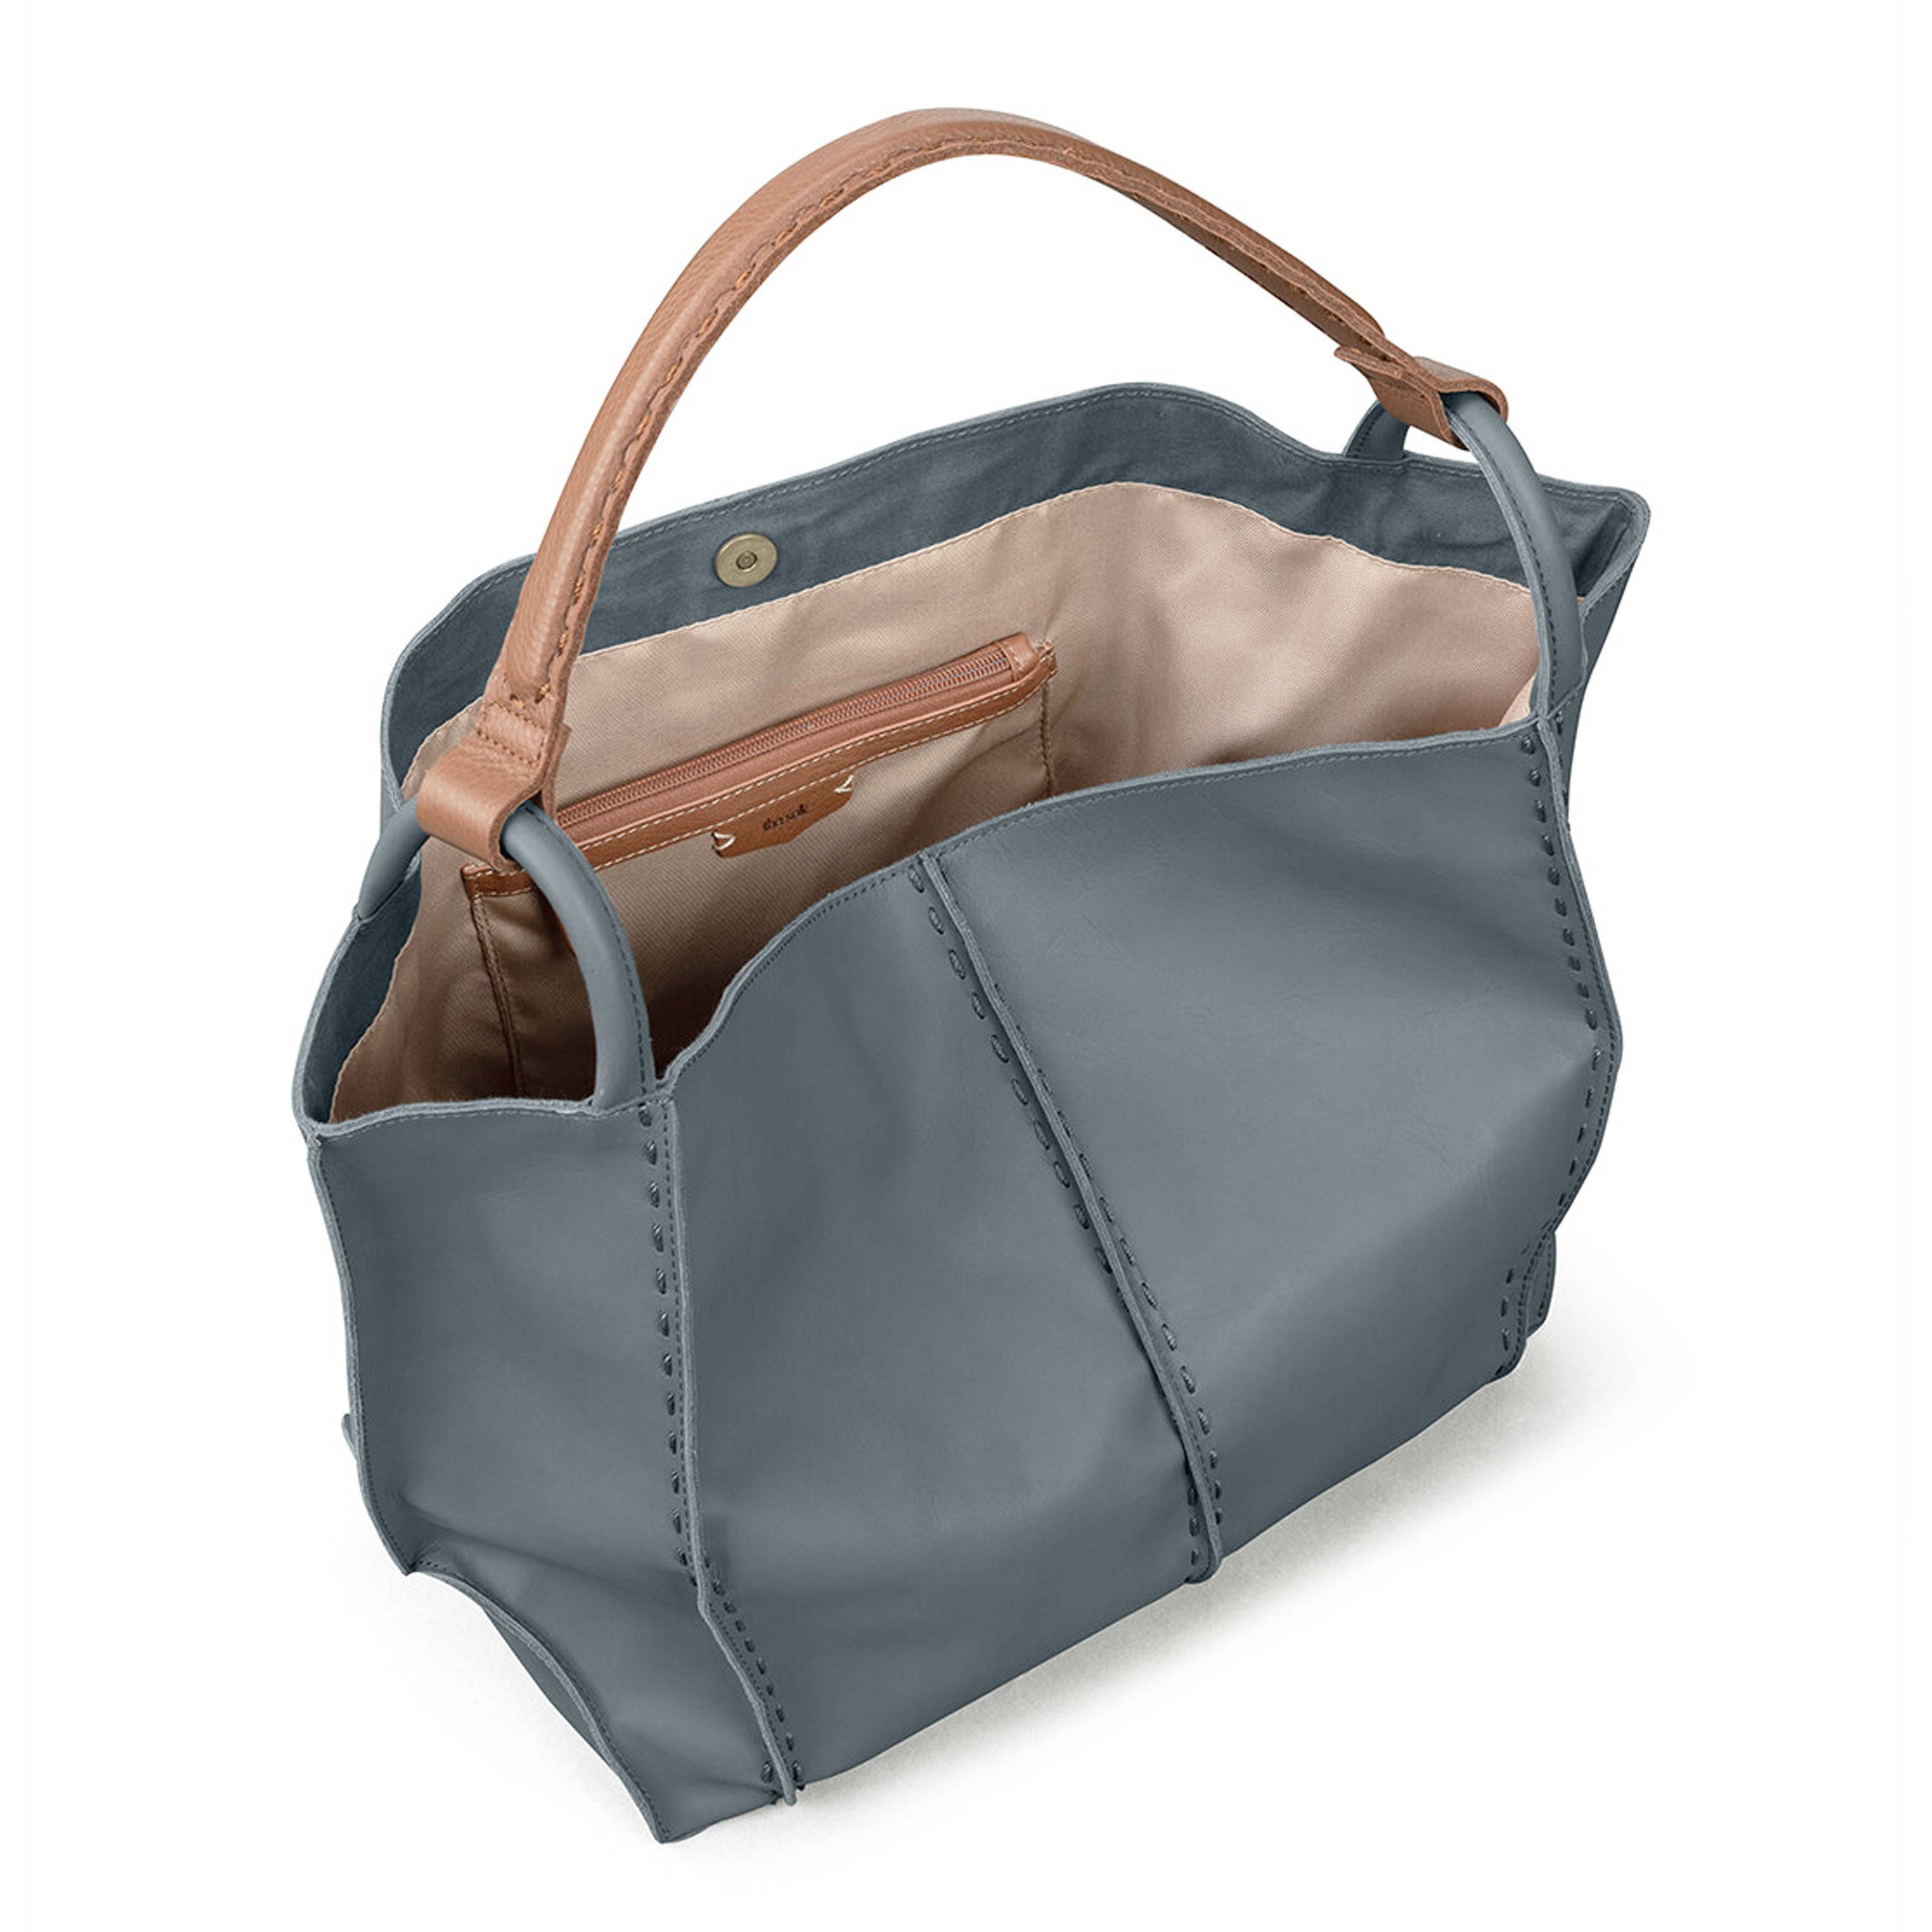 Large TOTE leather bag in light GRAY. Soft natural suede bag